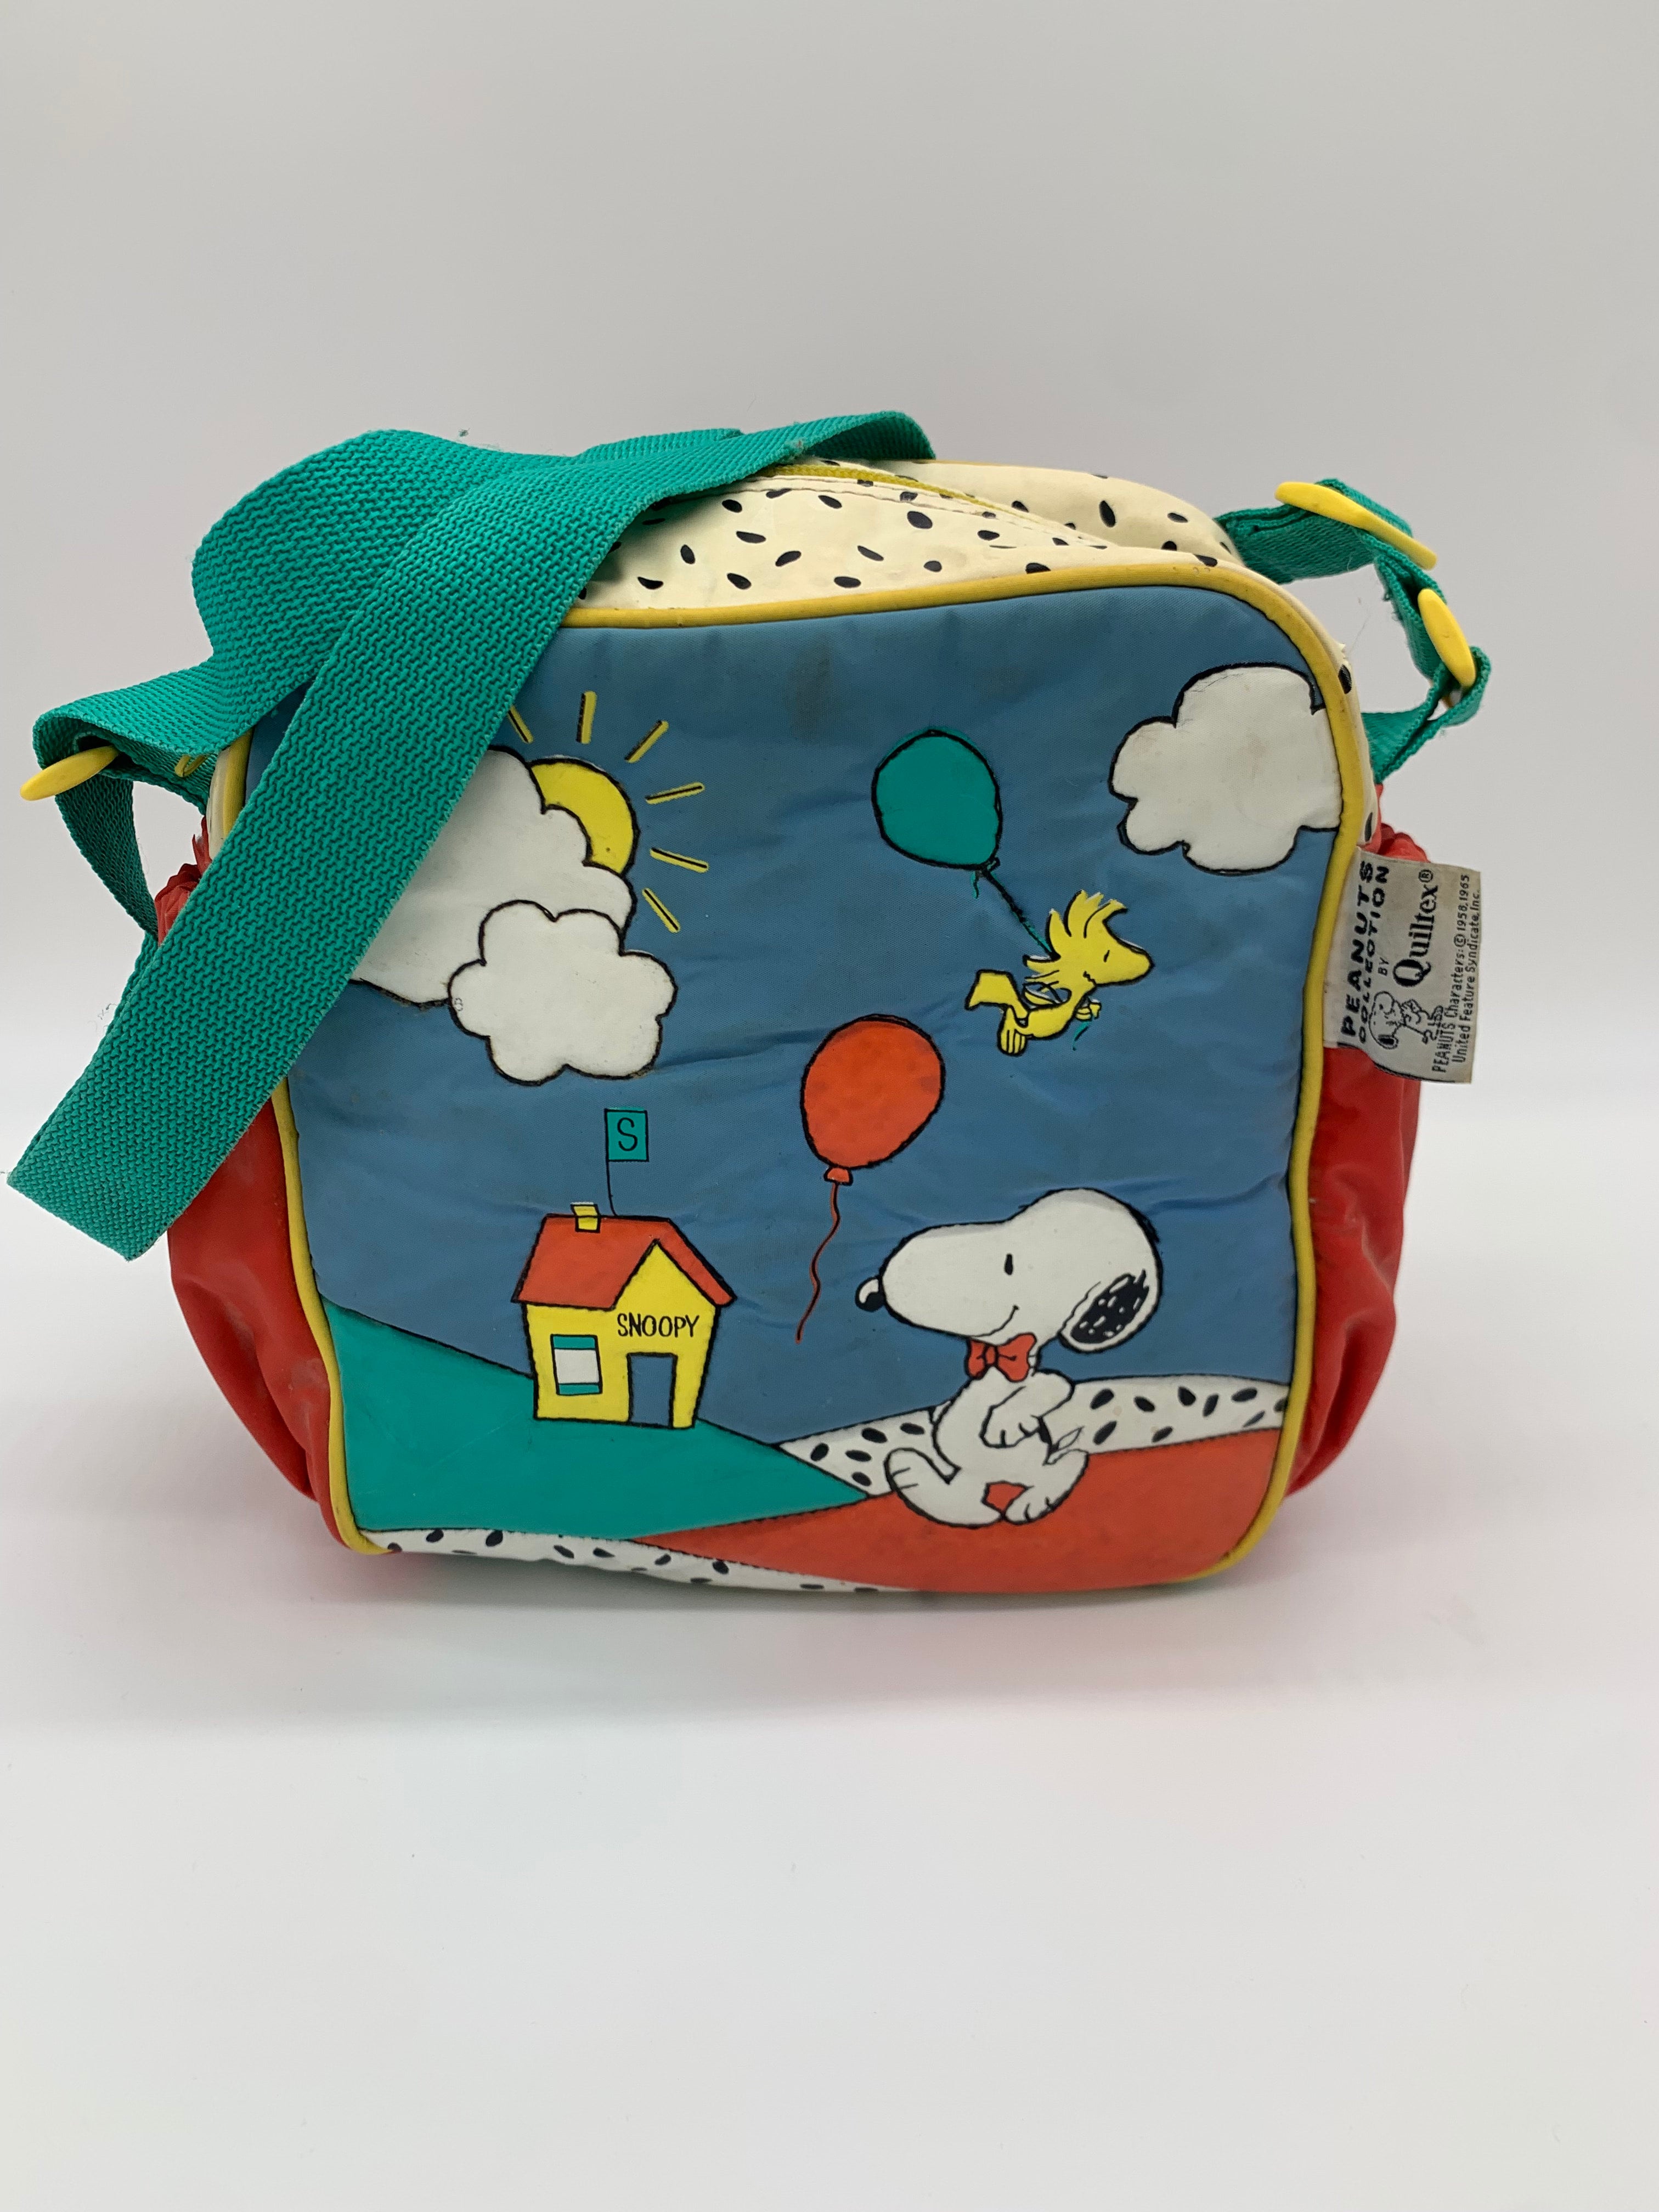 Lunch bag Snoopy Lunch time KGA1 : Amazon.in: Garden & Outdoors